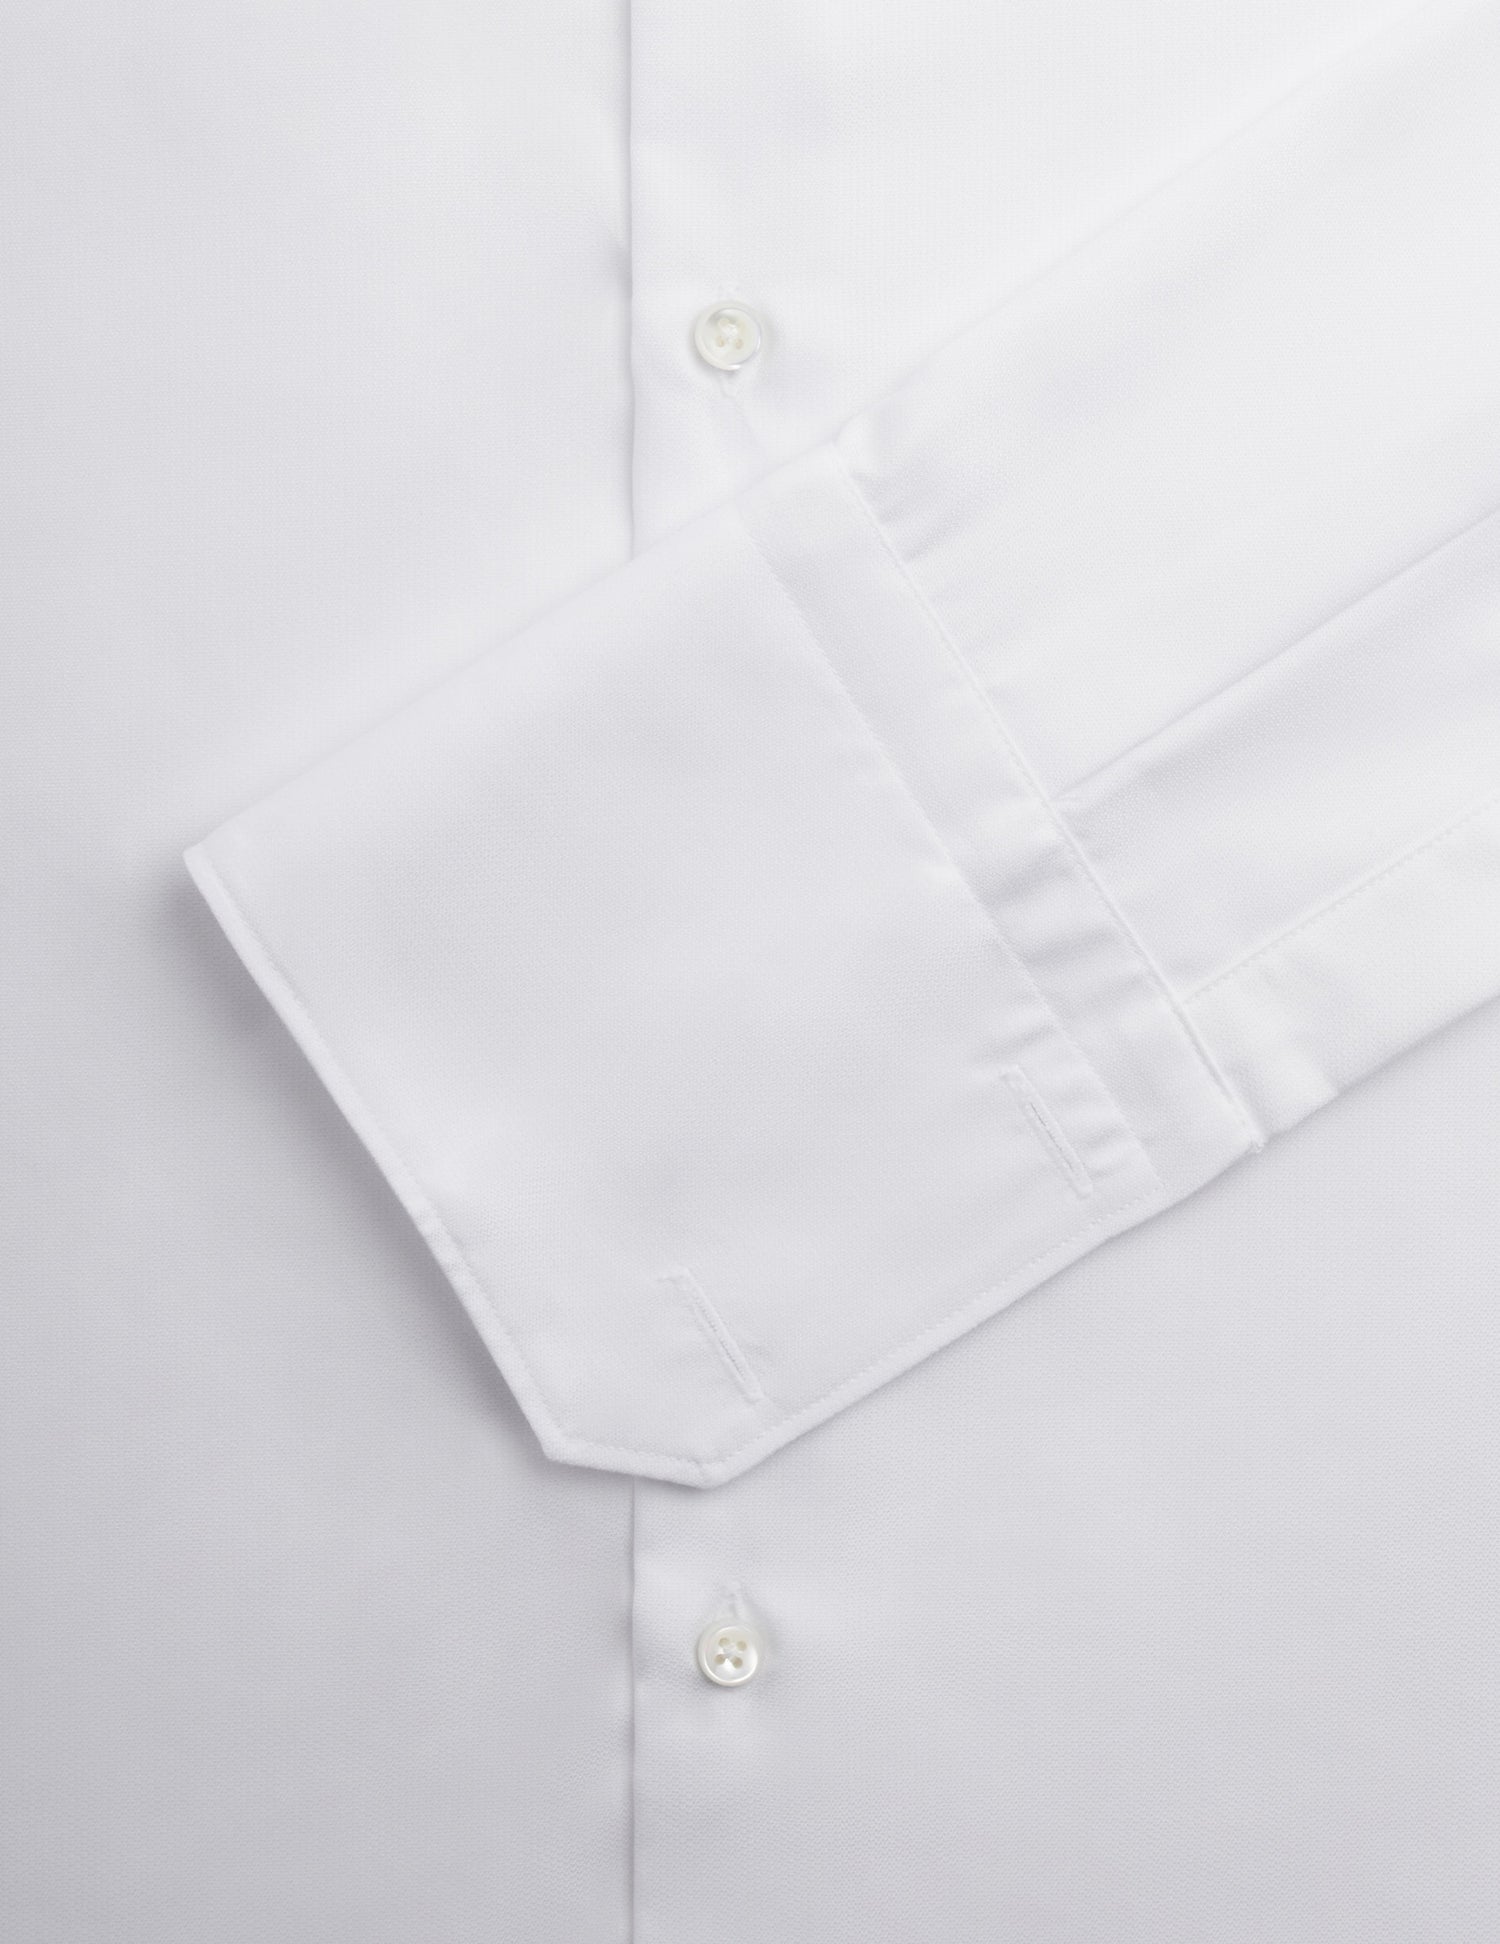 Semi-fitted white shirt - Fashioned - Figaret Collar - French Cuffs#2